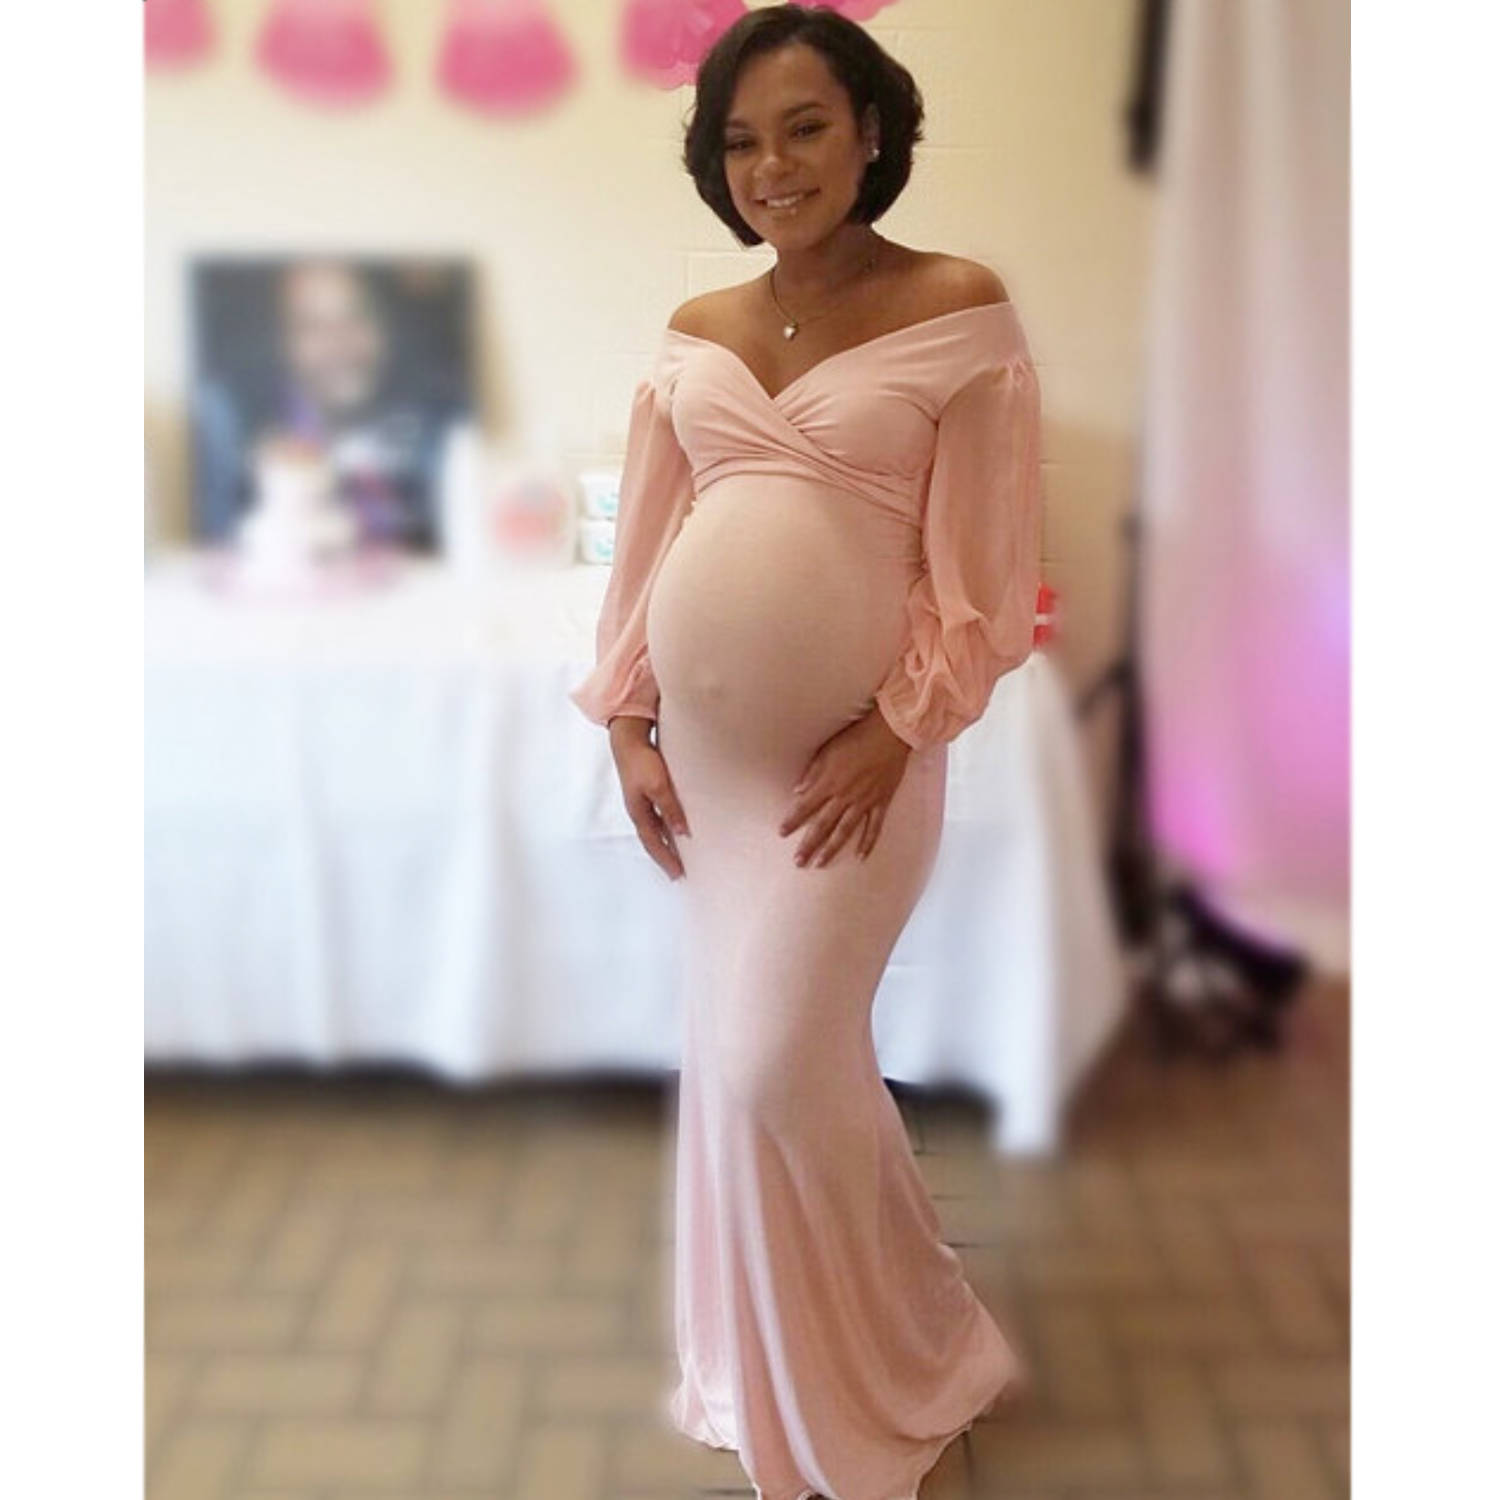 Full Size of Baby Shower:baby Shower Dresses Indian Maternity Maxi Dress Cheap Maternity Dresses For Baby Showers Trendy Maternity Clothes A Pea In The Pod Maternity Clothes Maternity Dresses Formal 2 Searches Left. What Should I Wear To My Baby Shower